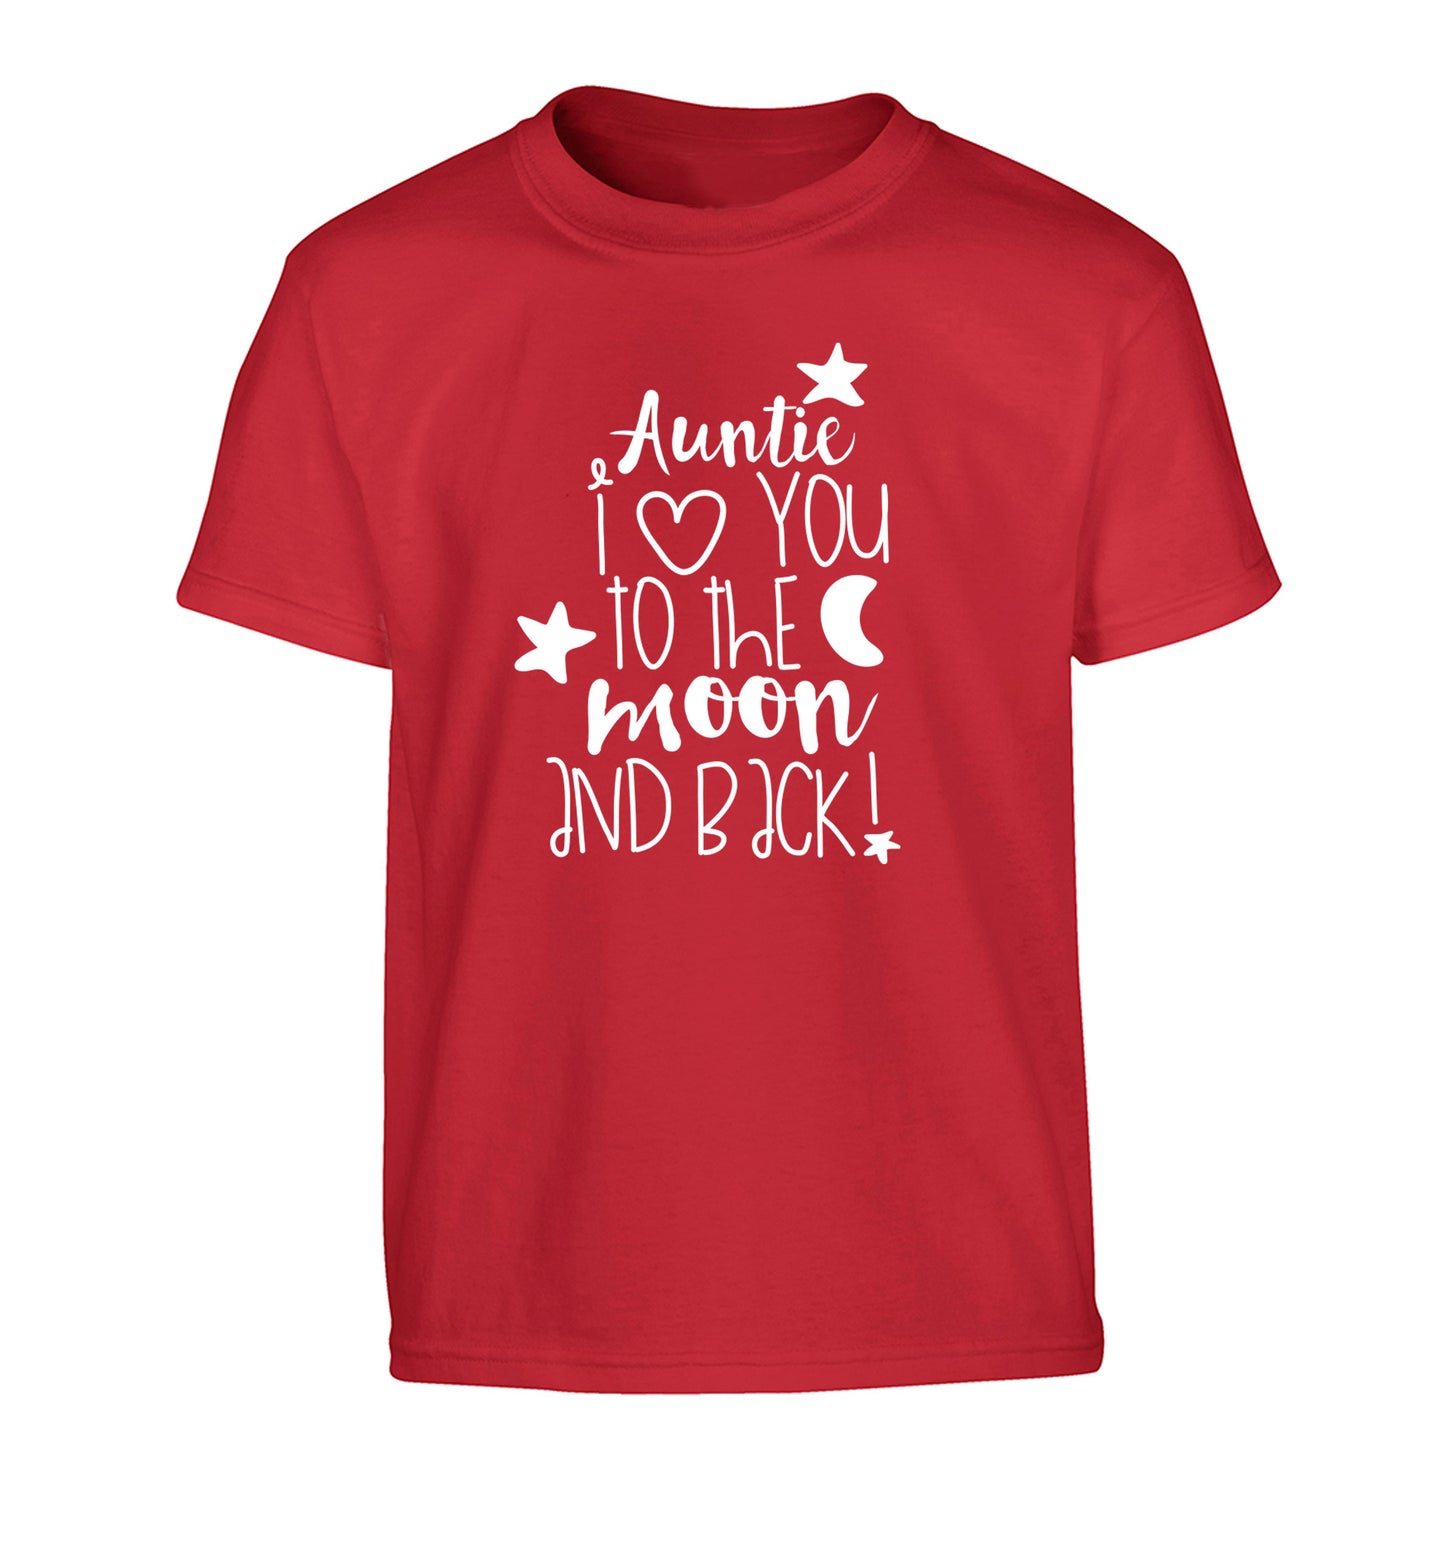 Auntie I love you to the moon and back Children's red Tshirt 12-14 Years